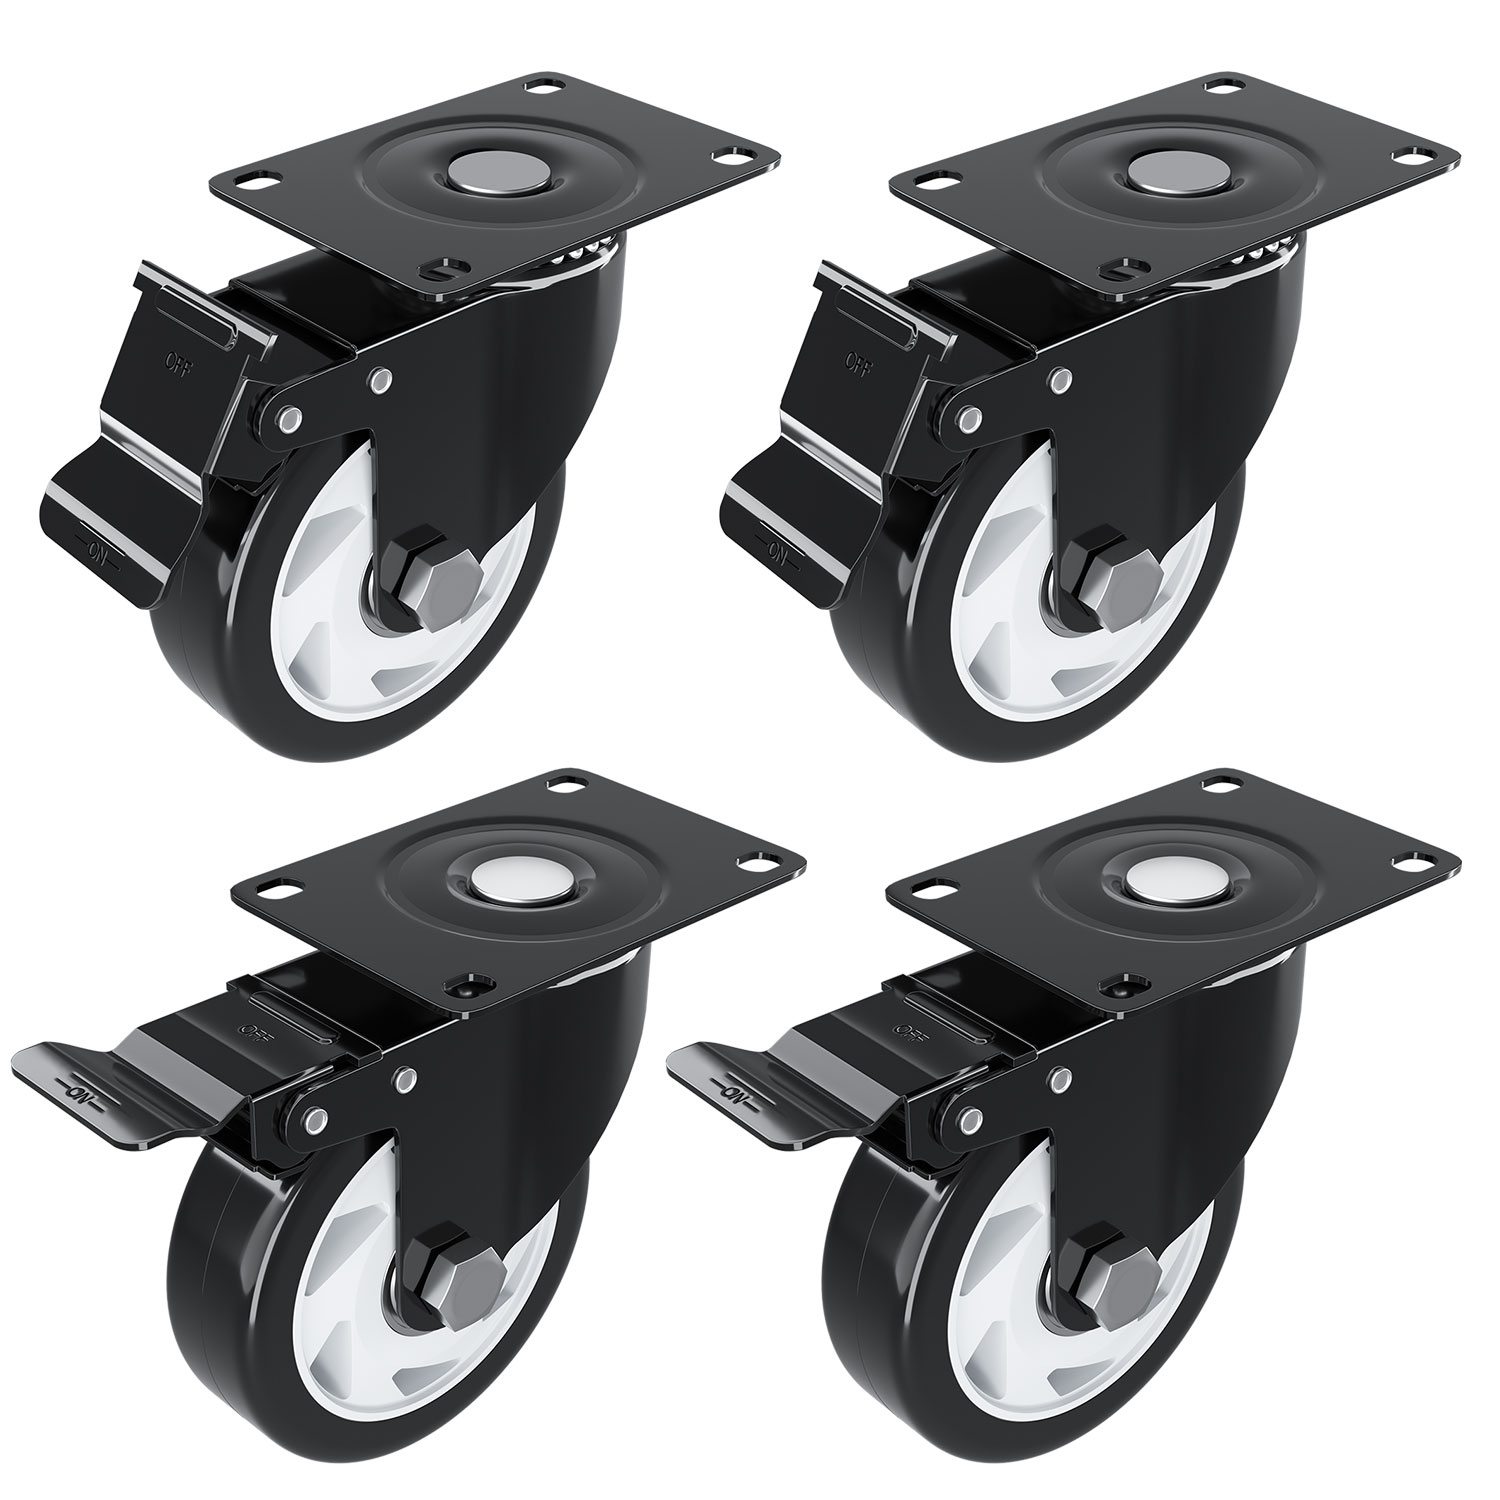 4 inch Caster Wheel with Brake Locking and NO Noise Rubber Wheels, Heavy Duty Swivel Plate Caster for DIY Cart Dolly, Support 1200 lbs, 4 Pack